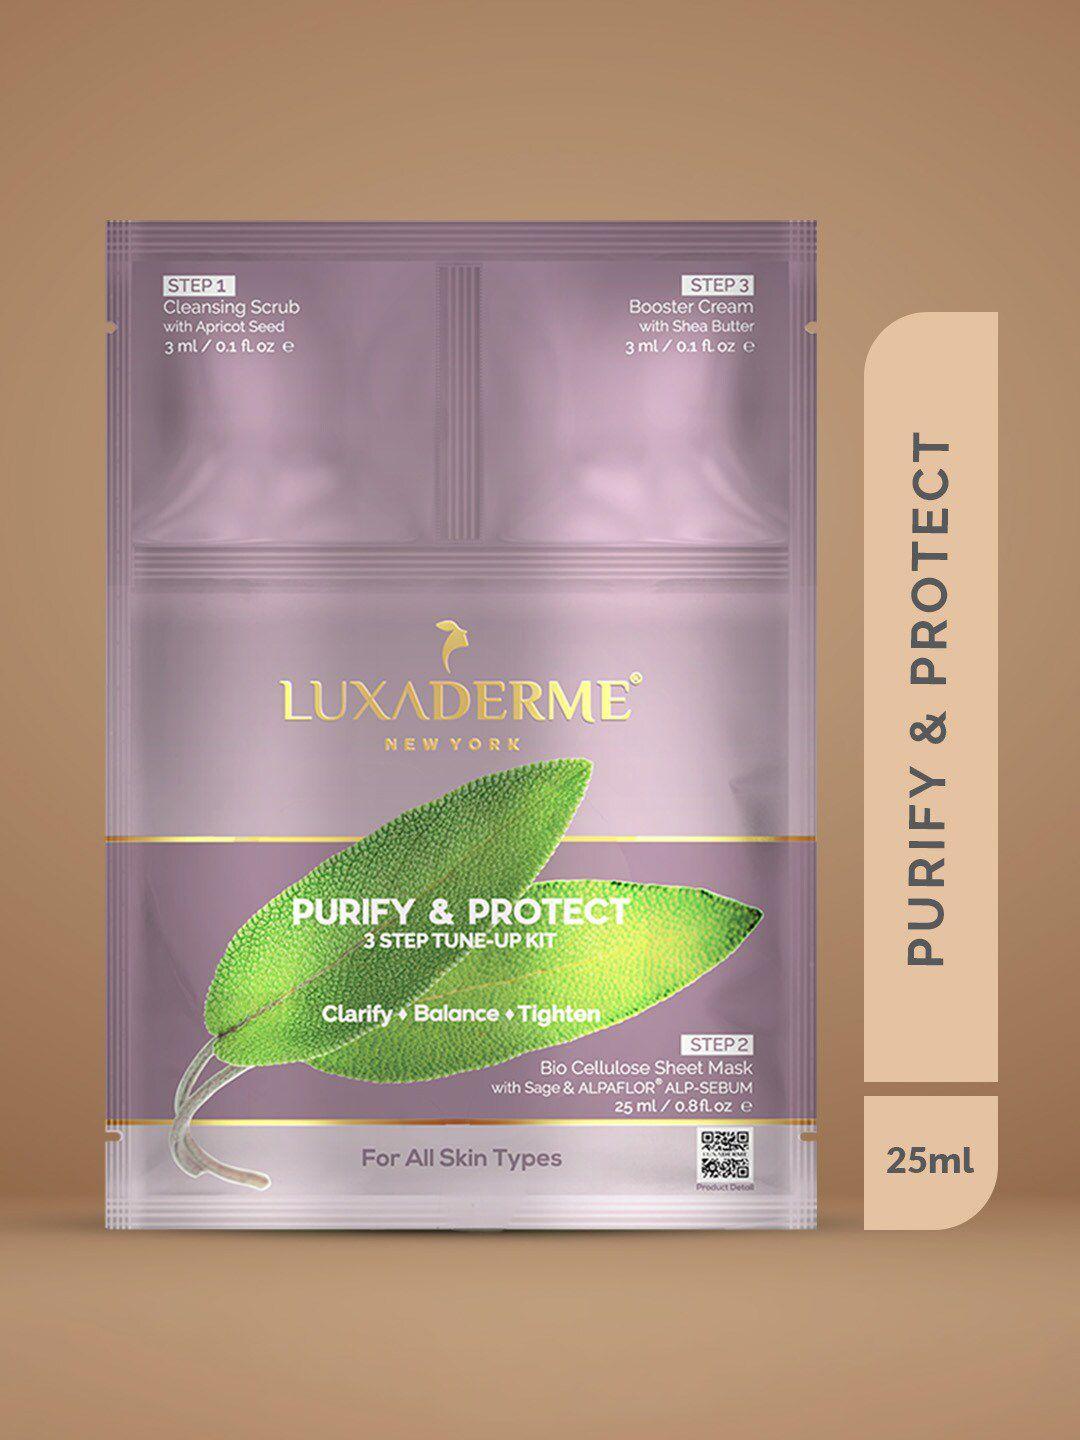 luxaderme purify & protect 3-step tune-up kit - 25ml